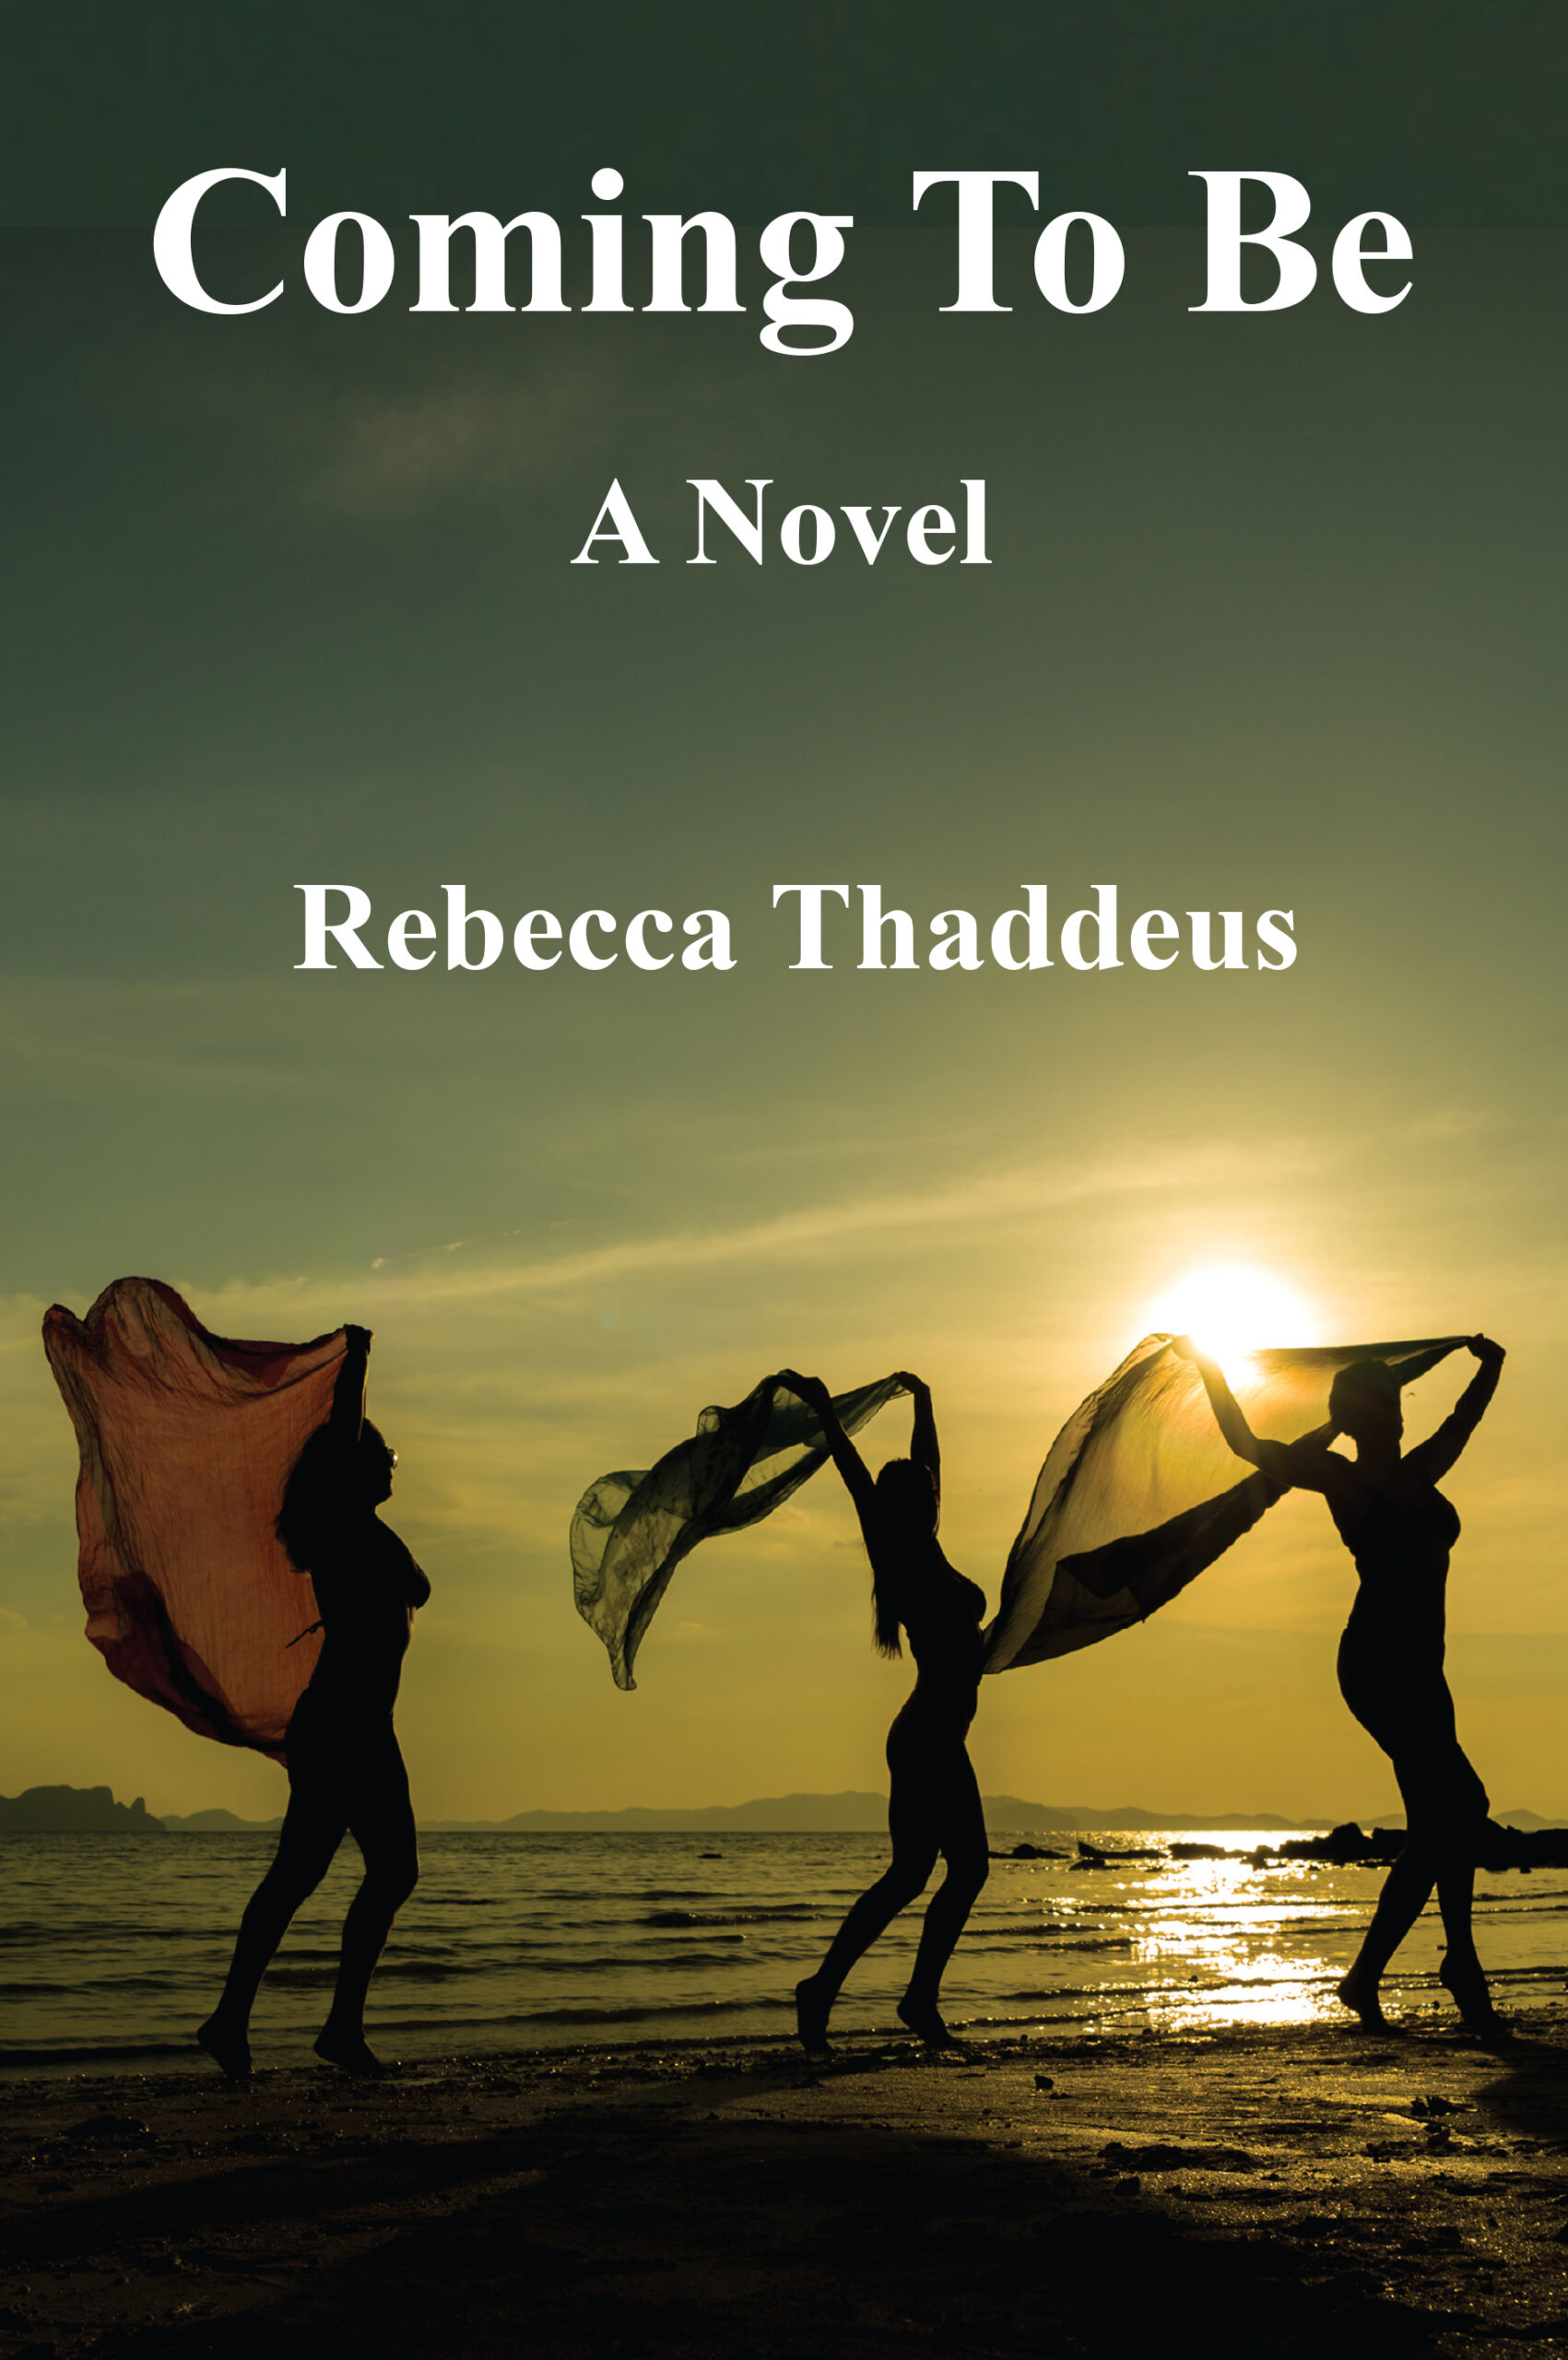 Coming To Be by Rebecca Thaddeus book cover